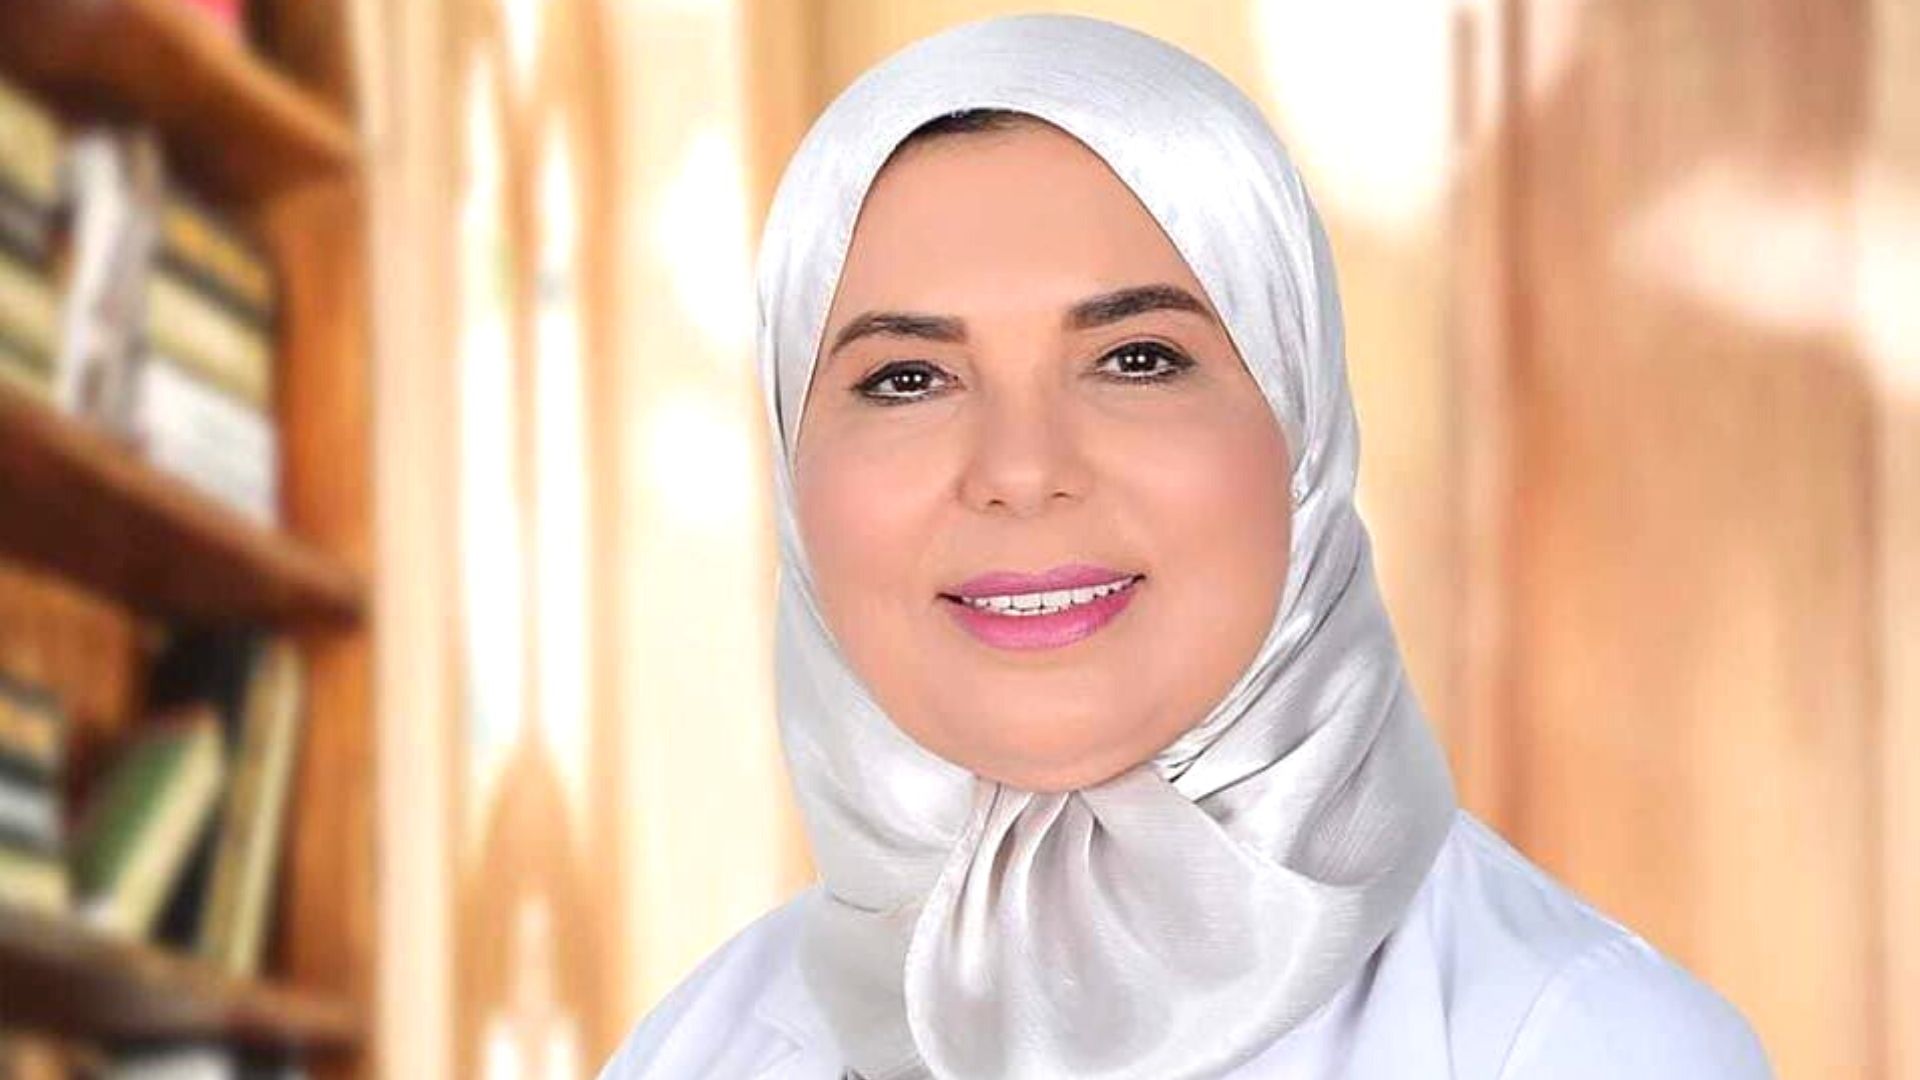 Our ambassador in Egypt, Dr. Eman Sanad. Professor of Dermatology and Laser, and an international trainer for aesthetic medicine.